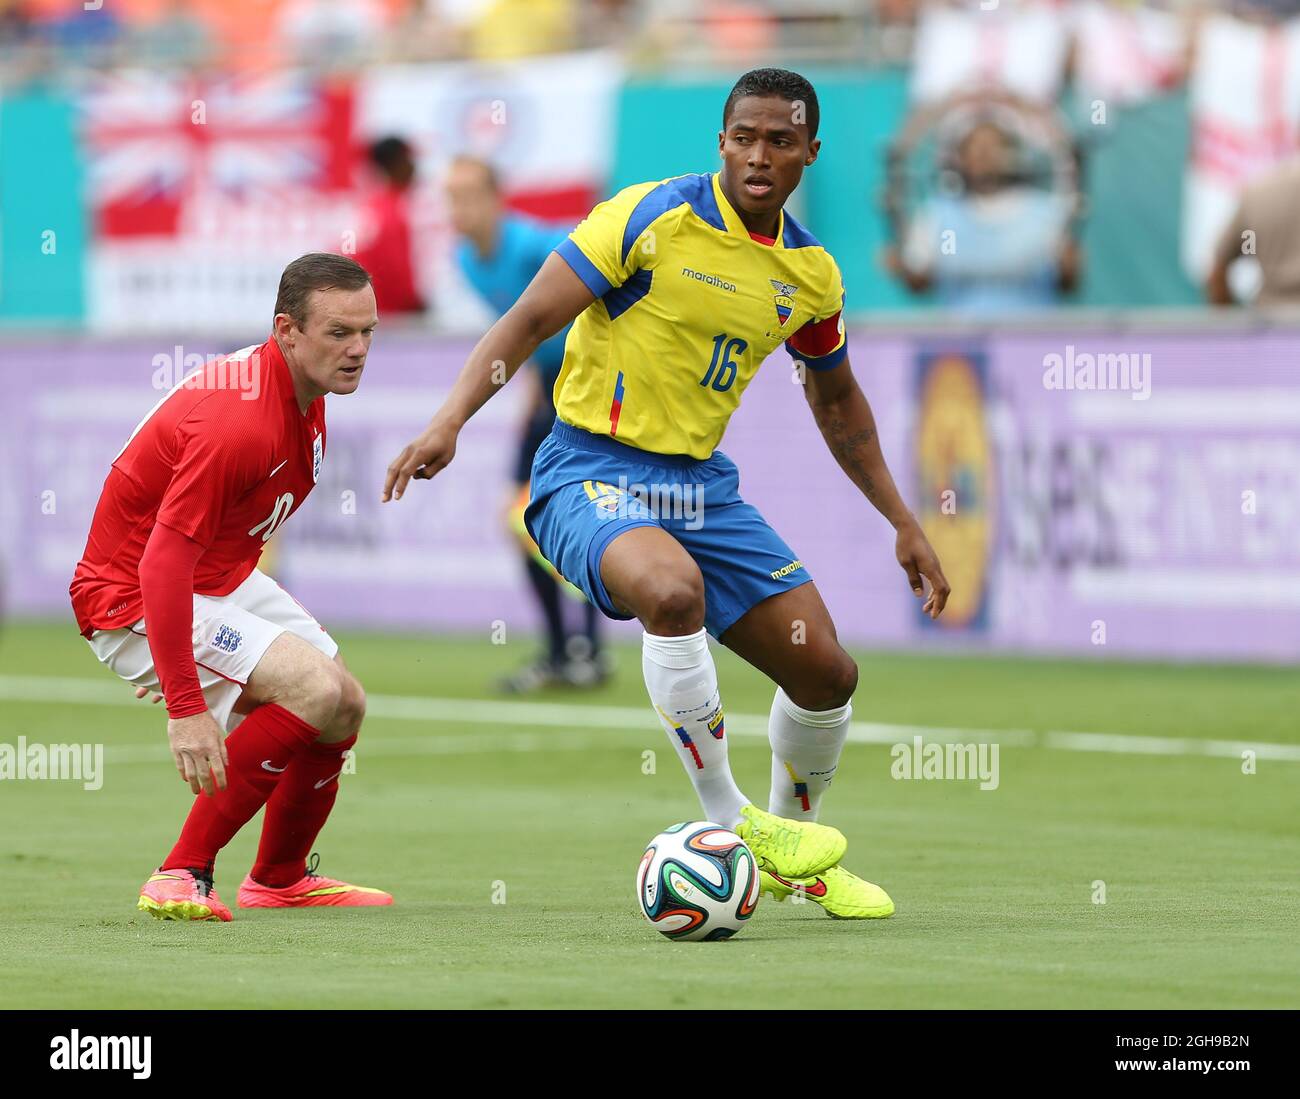 England's Wayne Rooney tussles with Ecuador's Antonio Valencia during the International Friendly match between England and Ecuador held at Sun Life Stadium in Miami, USA on June 4, 2014. Pic David Klein/Sportimage. Stock Photo